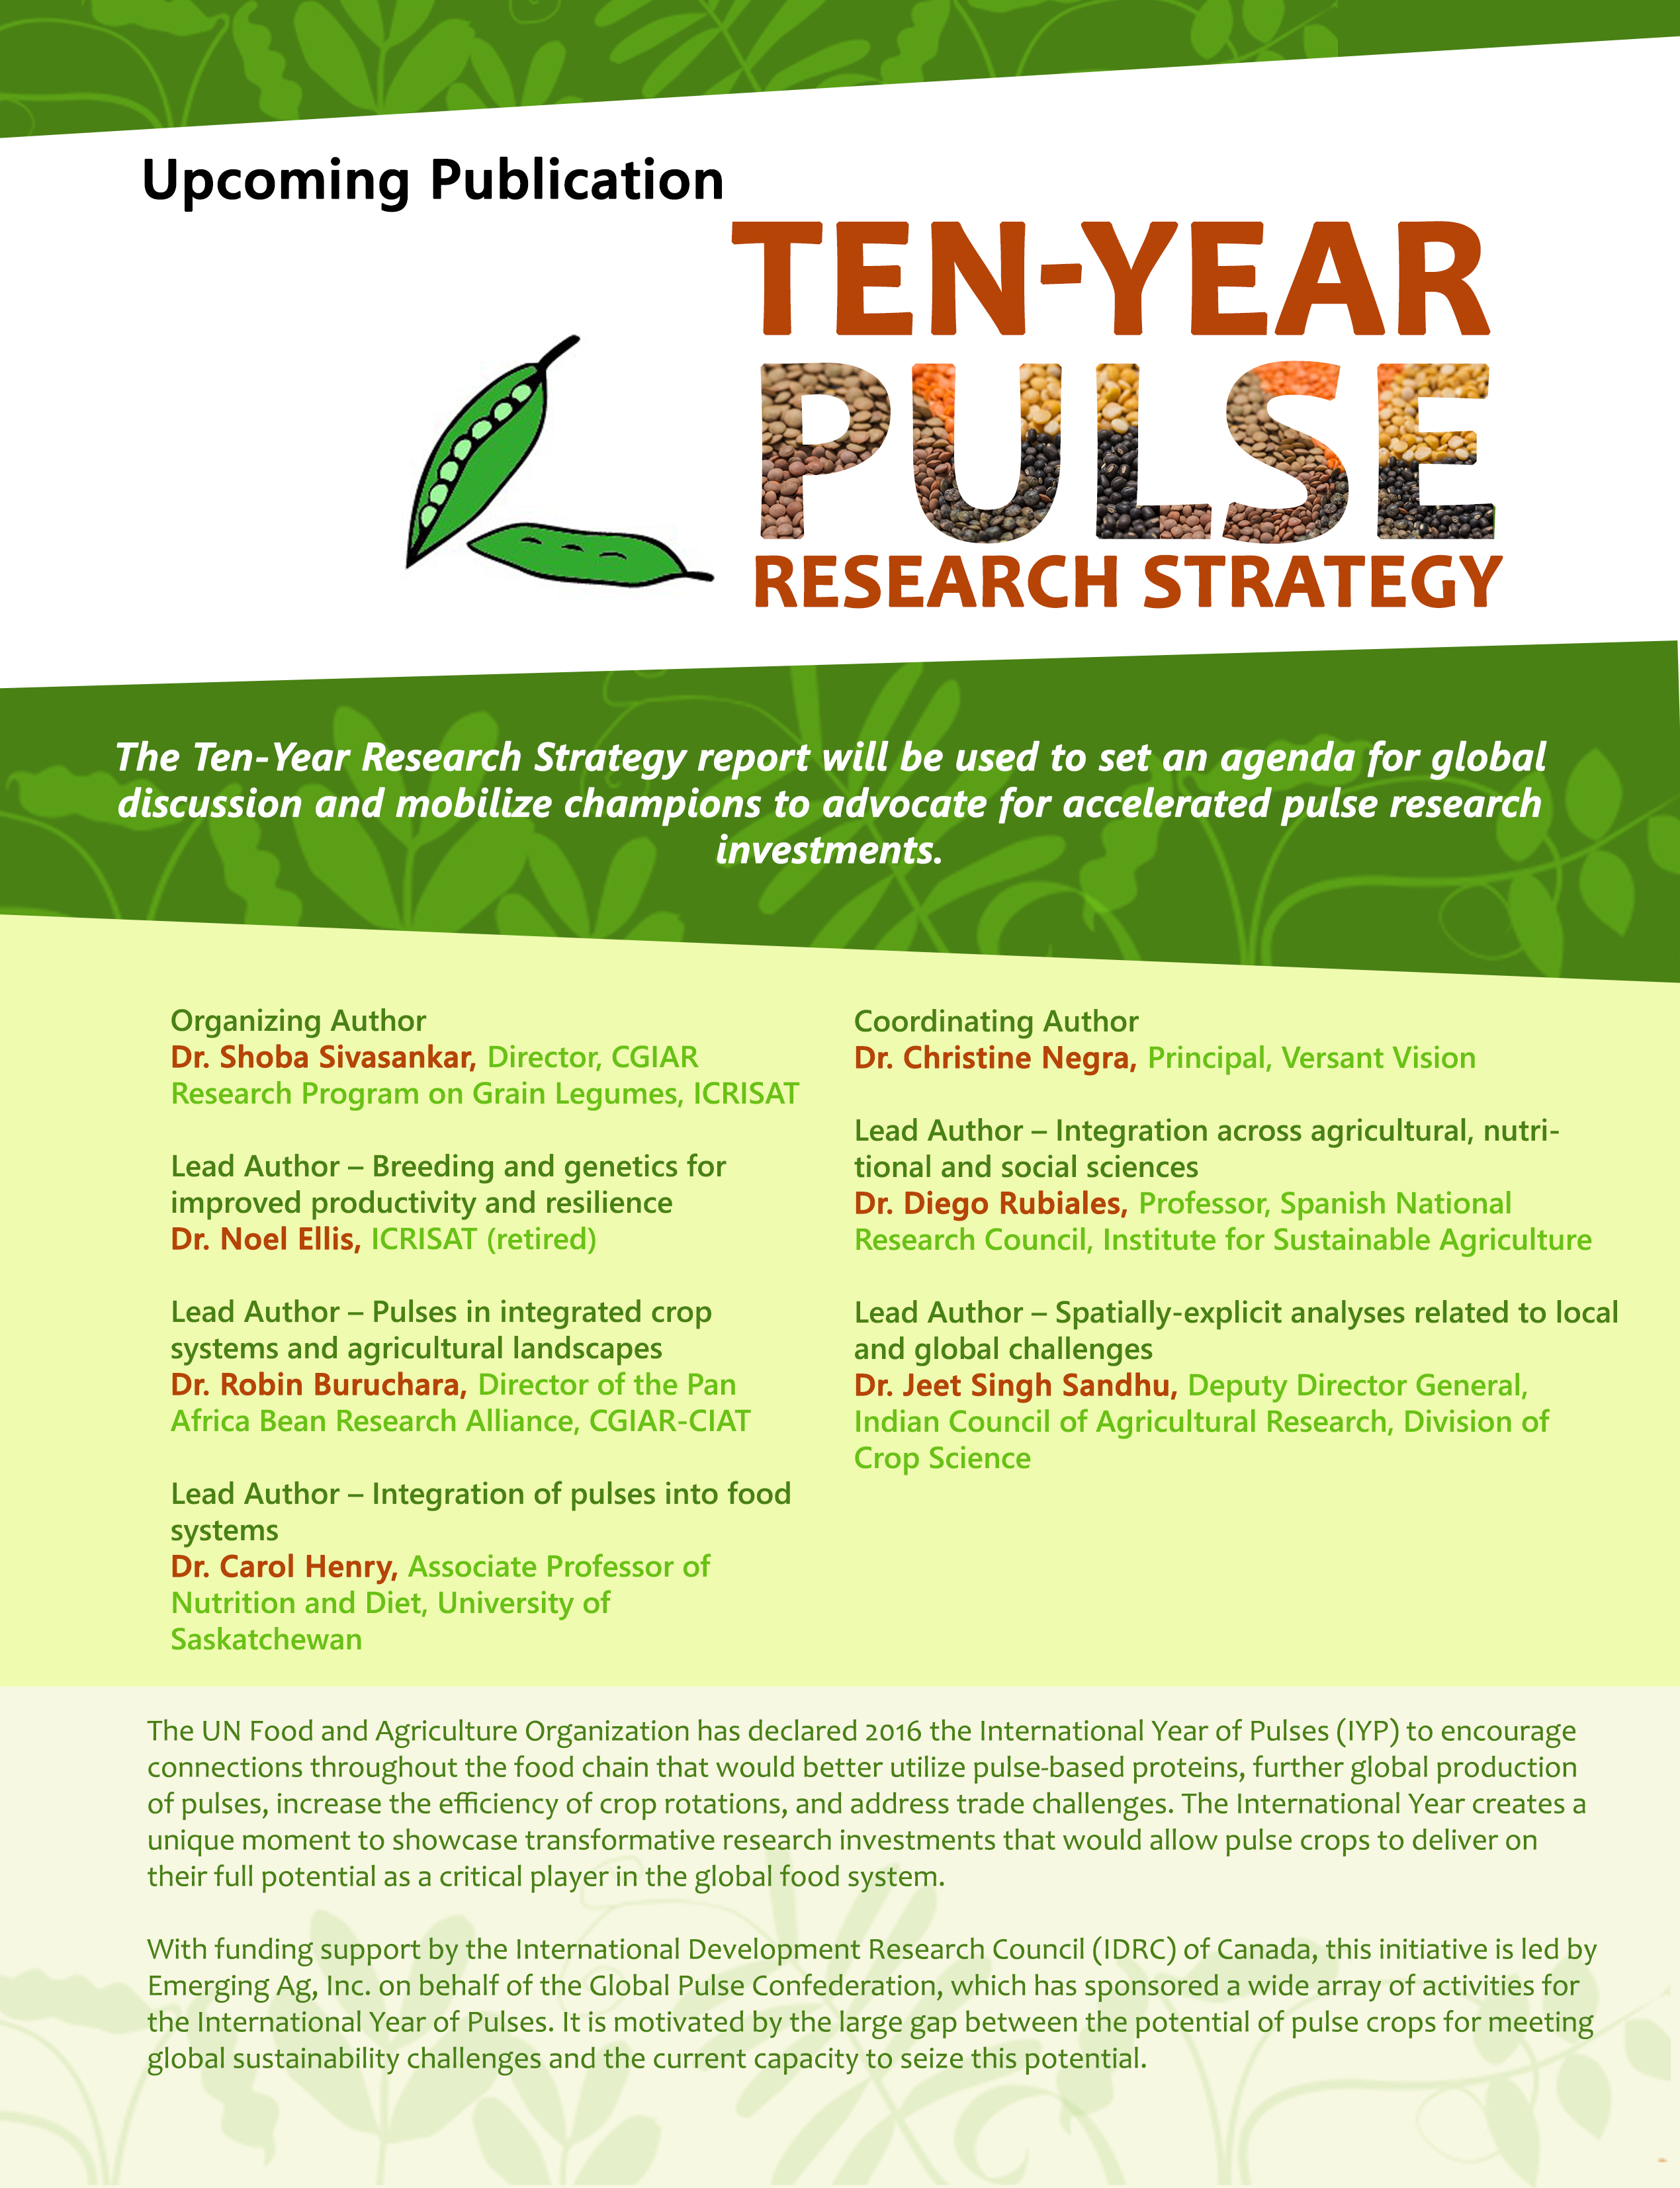 10-Year Research Strategy - Pulses